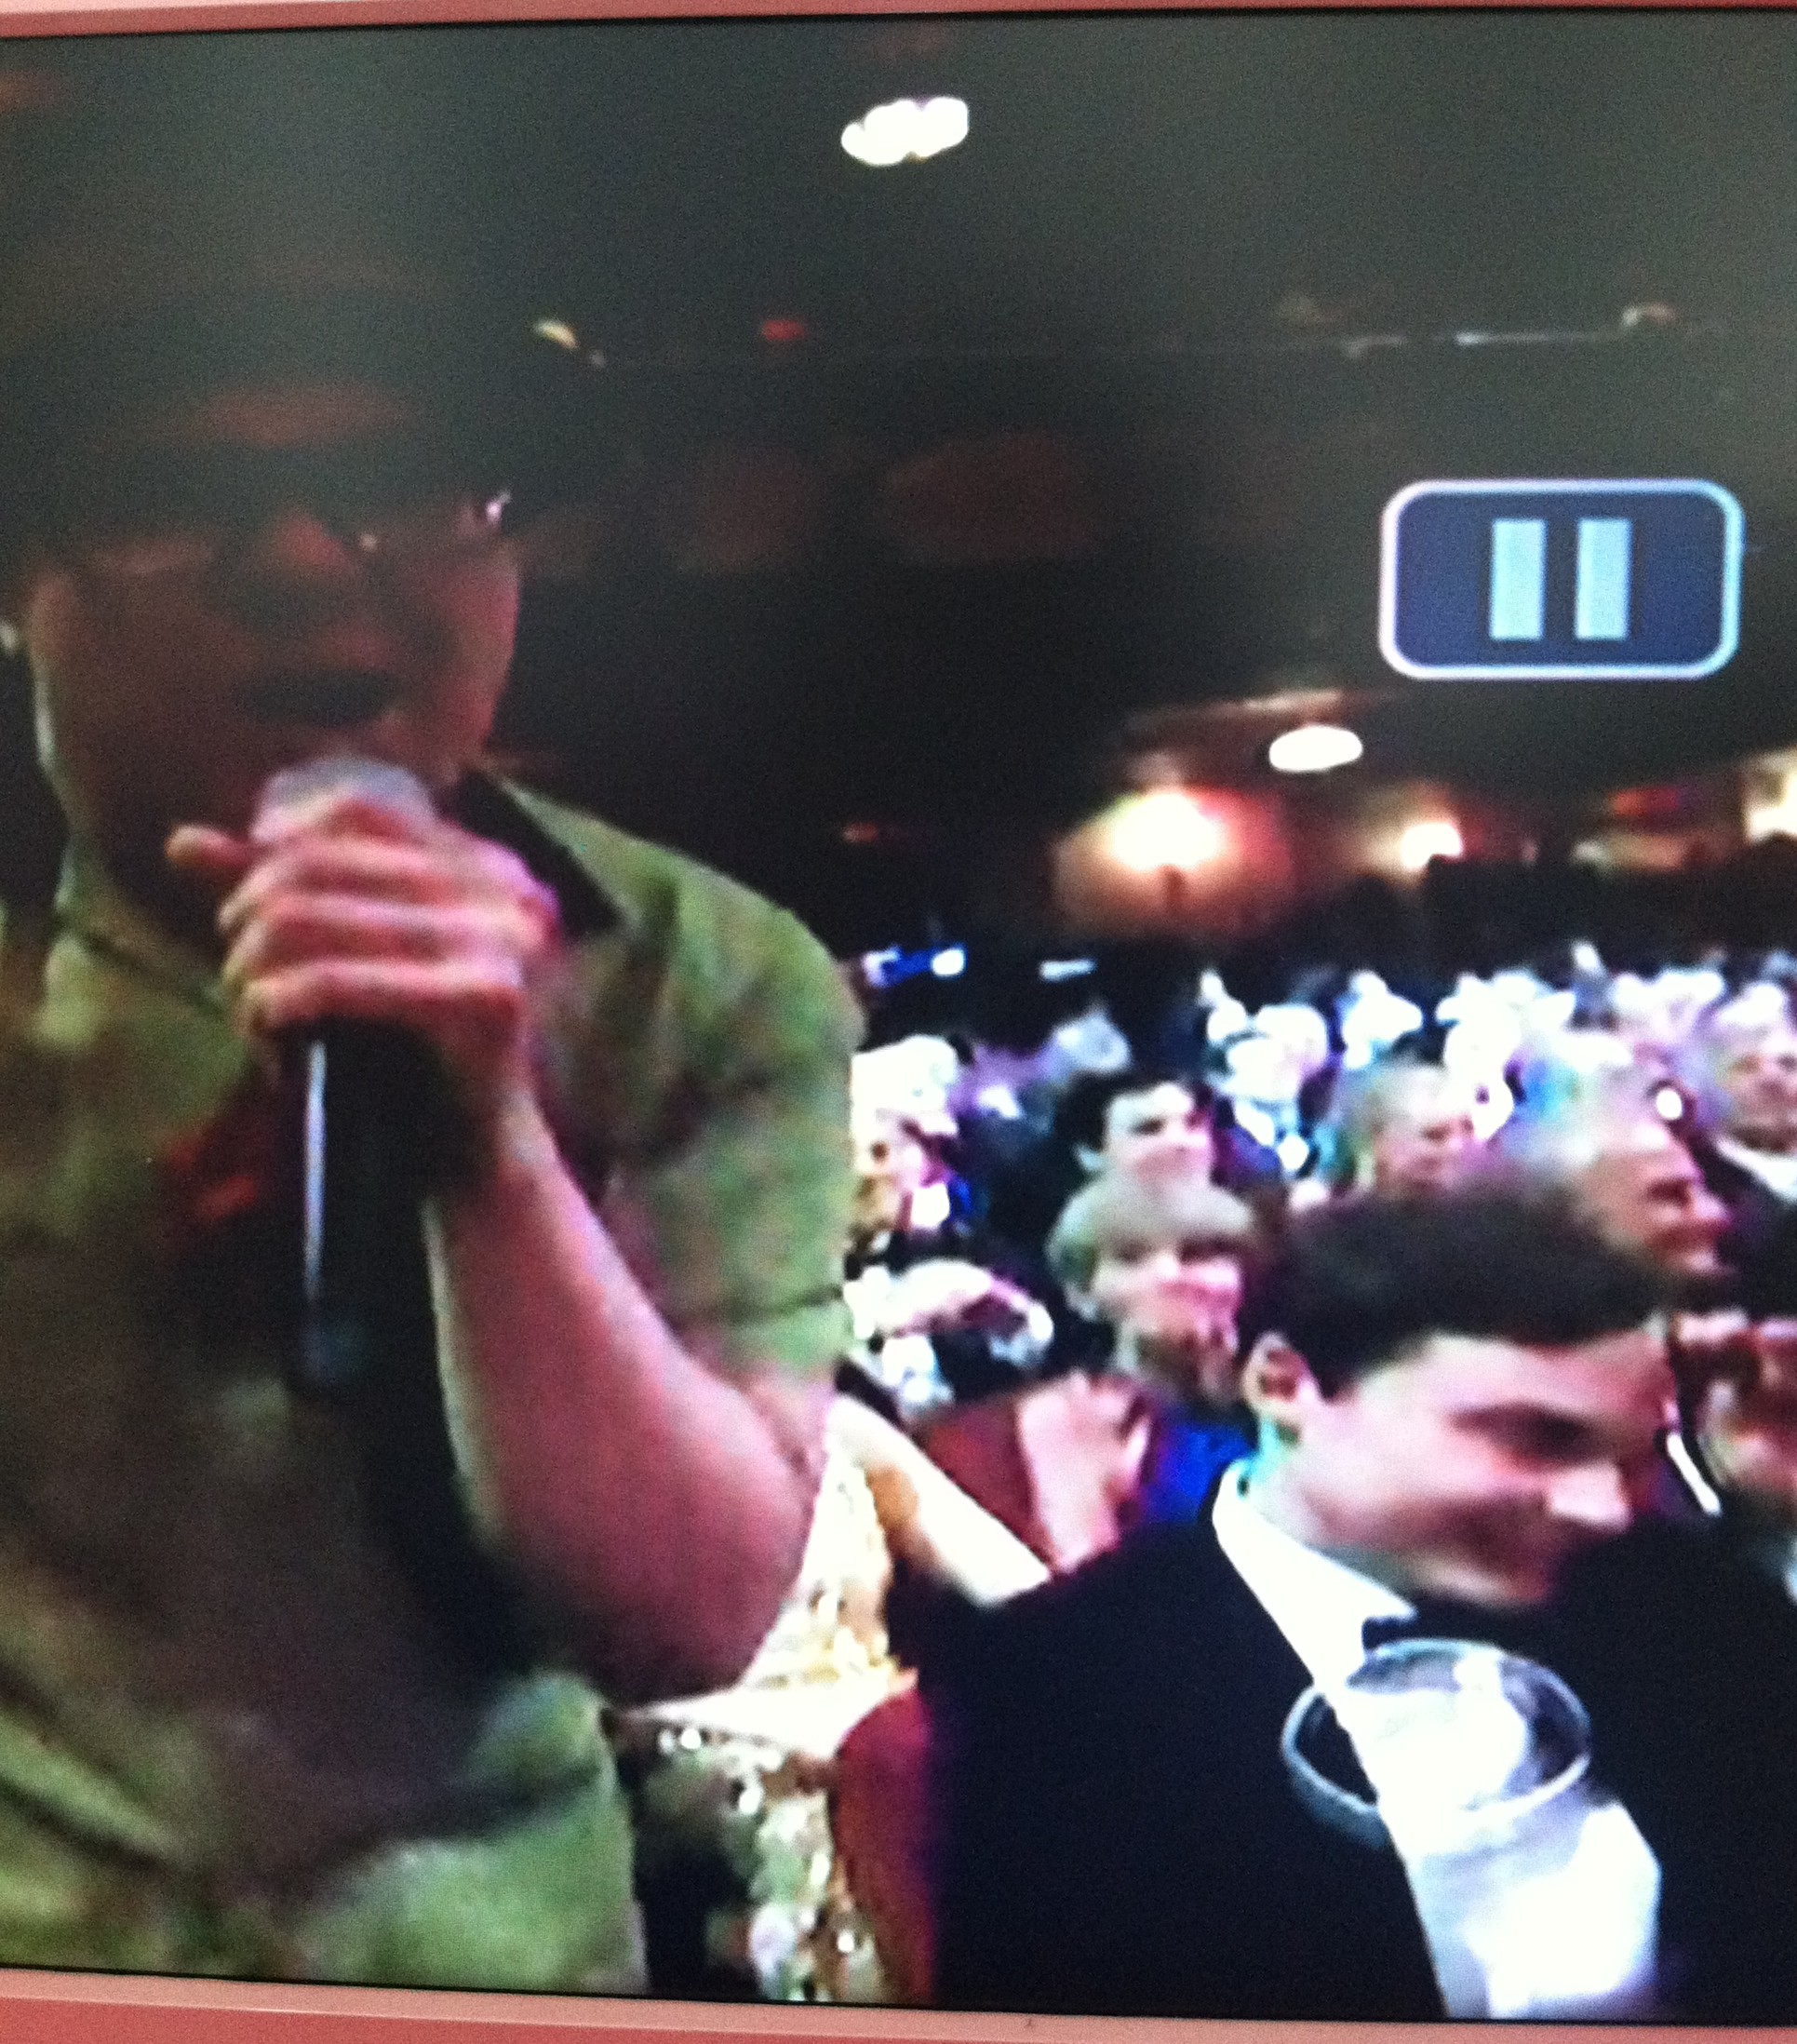 Jim Parsons looking away/down during the Godspell performance on the Tony Awards